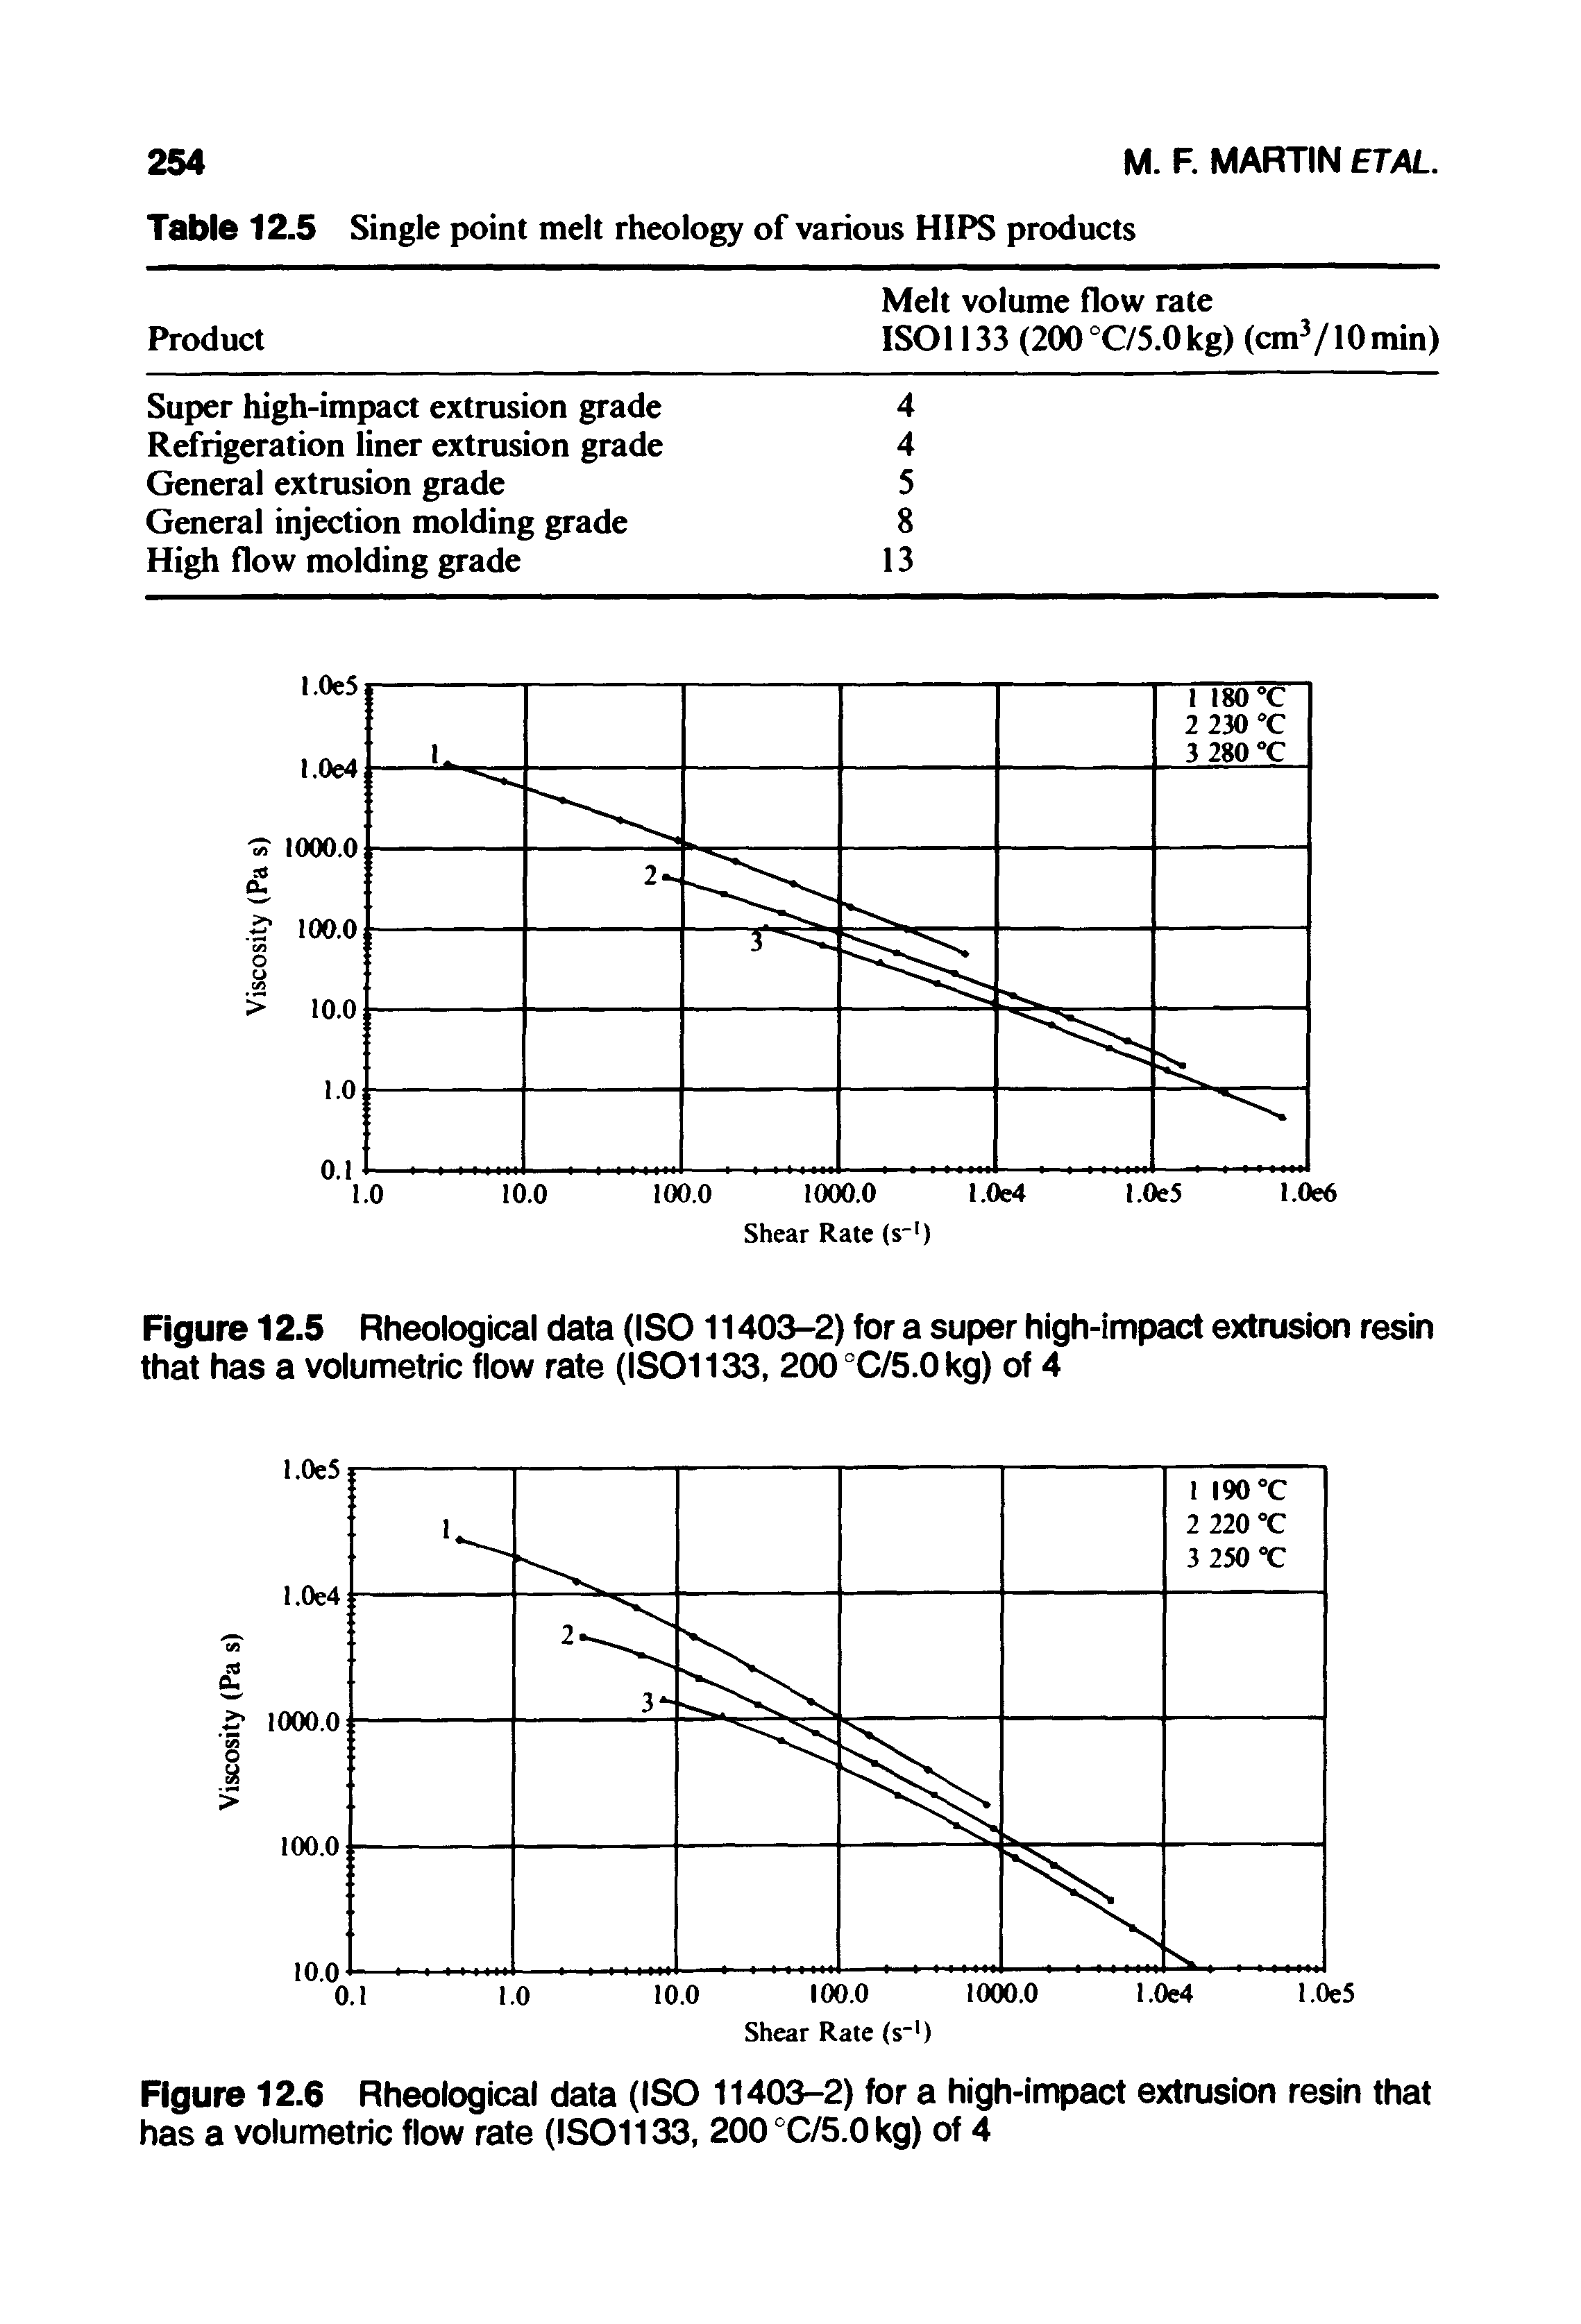 Figure 12.5 Rheological data (IS011403-2) for a super high-impact extrusion resin that has a volumetric flow rate (IS01133, 200°C/5.0kg) of 4...